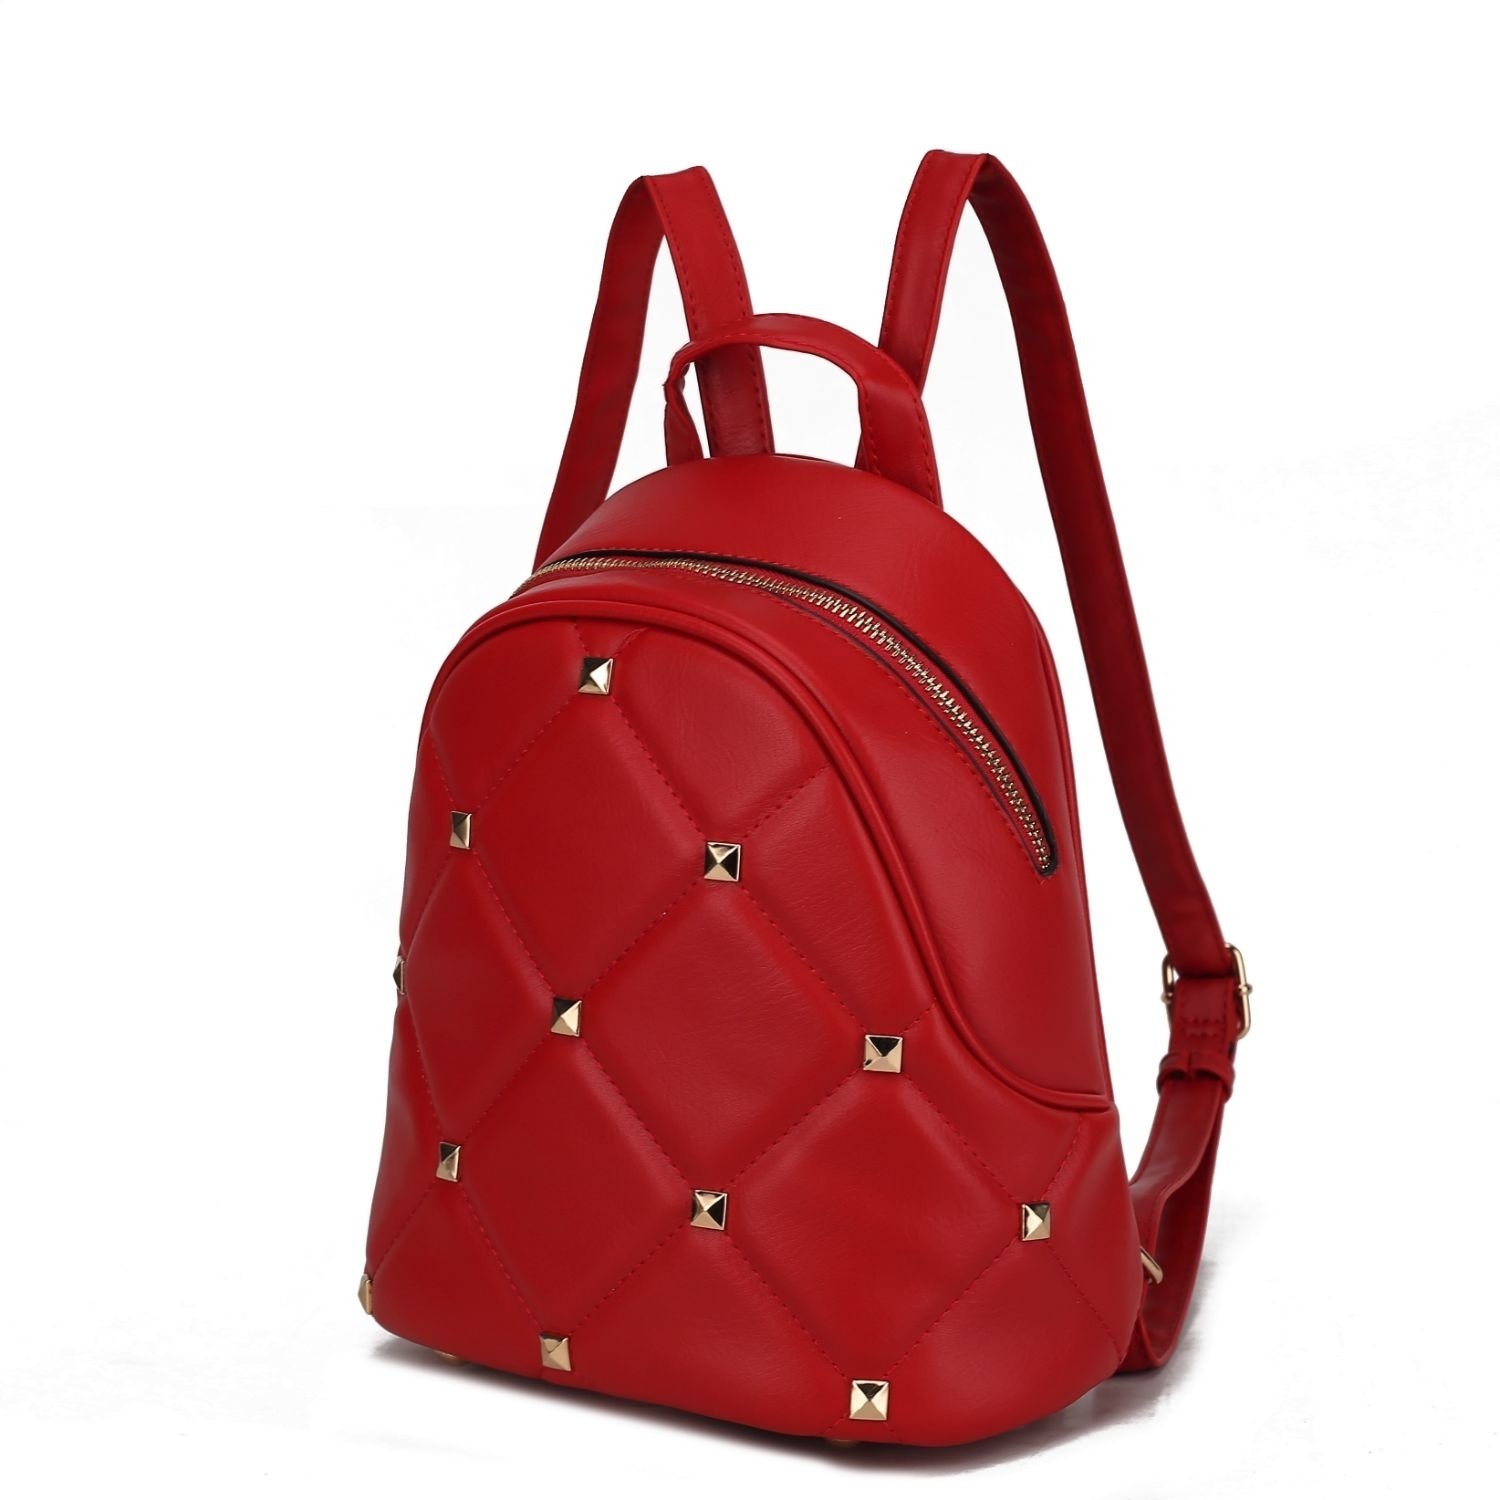 MKF Collection Hayden Backpack For Women's Vegan Leather Medium Daypack By Mia K. - Red